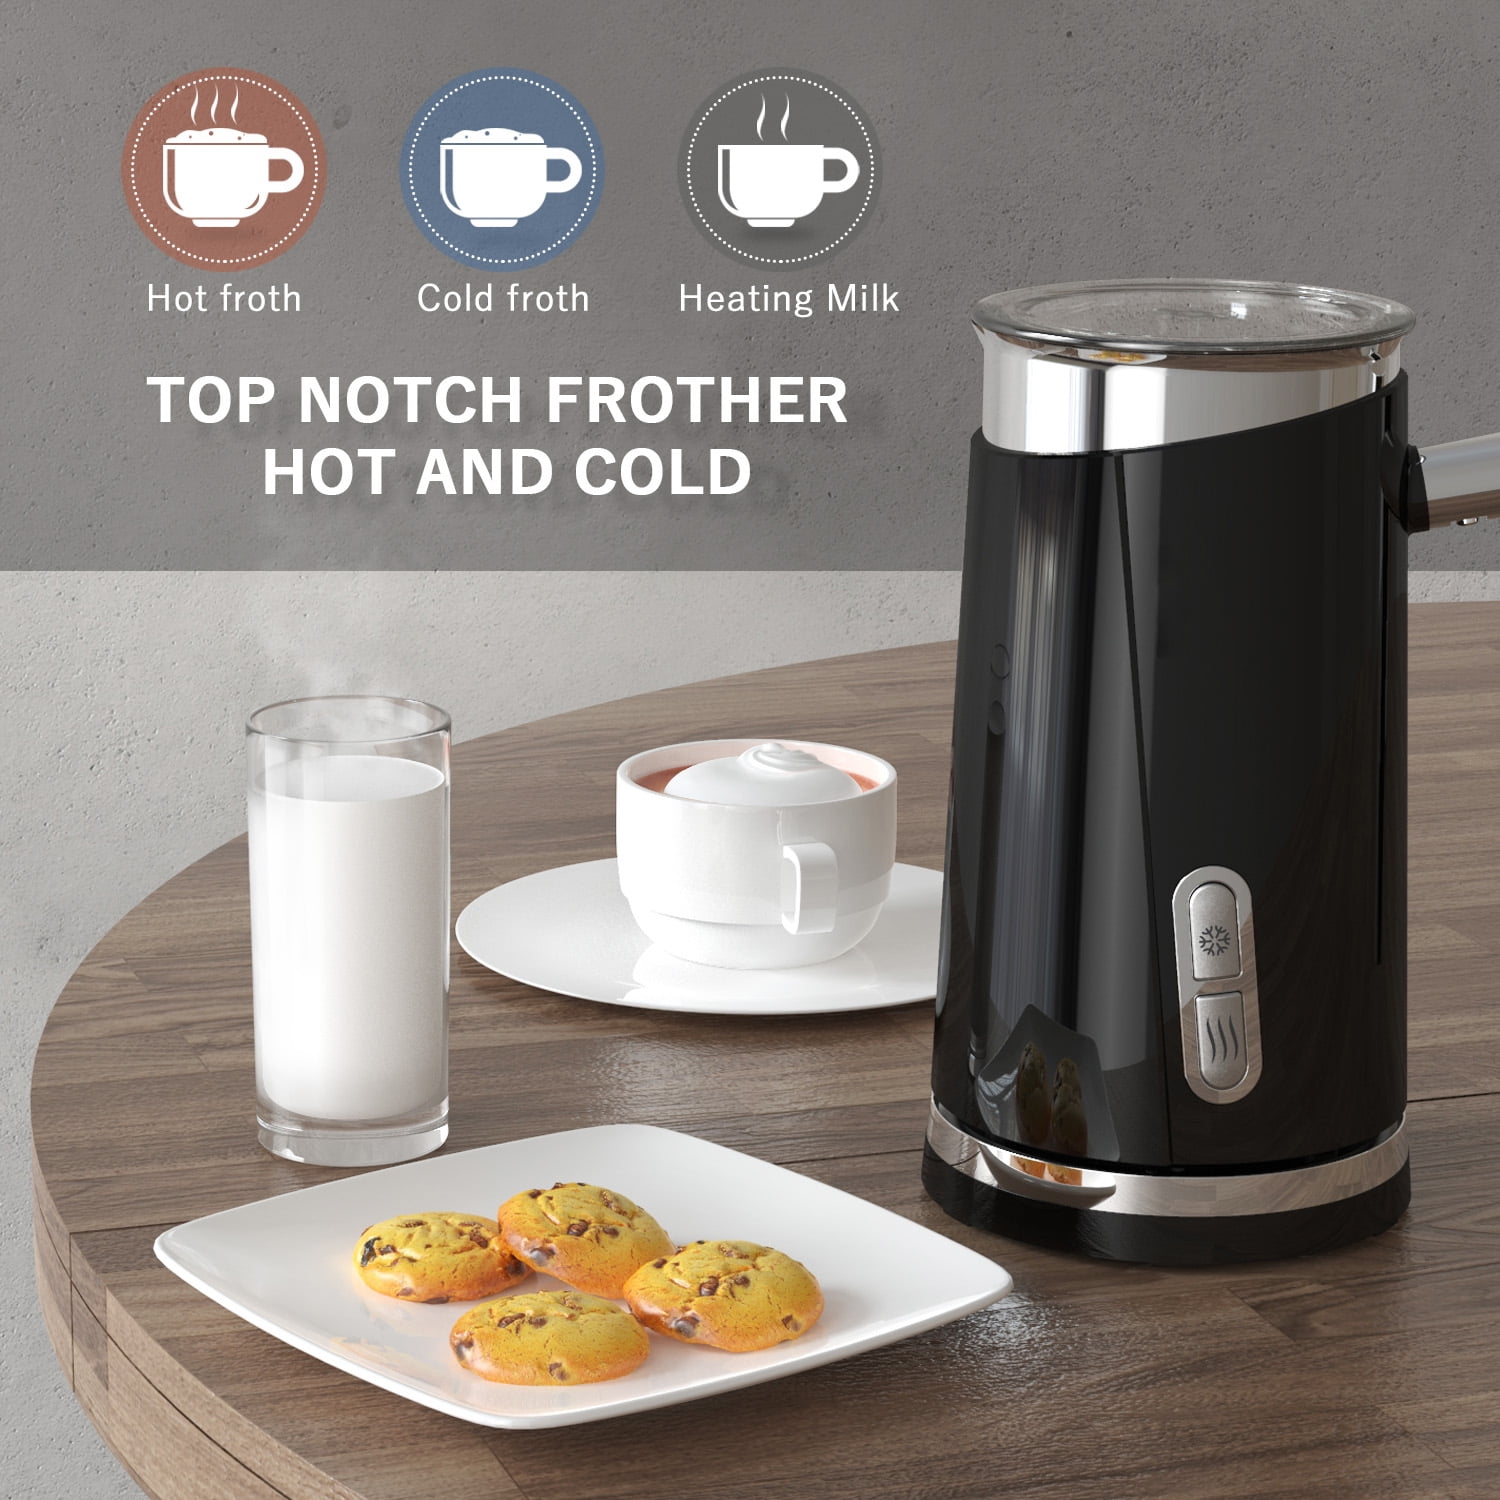 Coffart Automatic Milk Frother - Hot & Cold, Fully Automatic